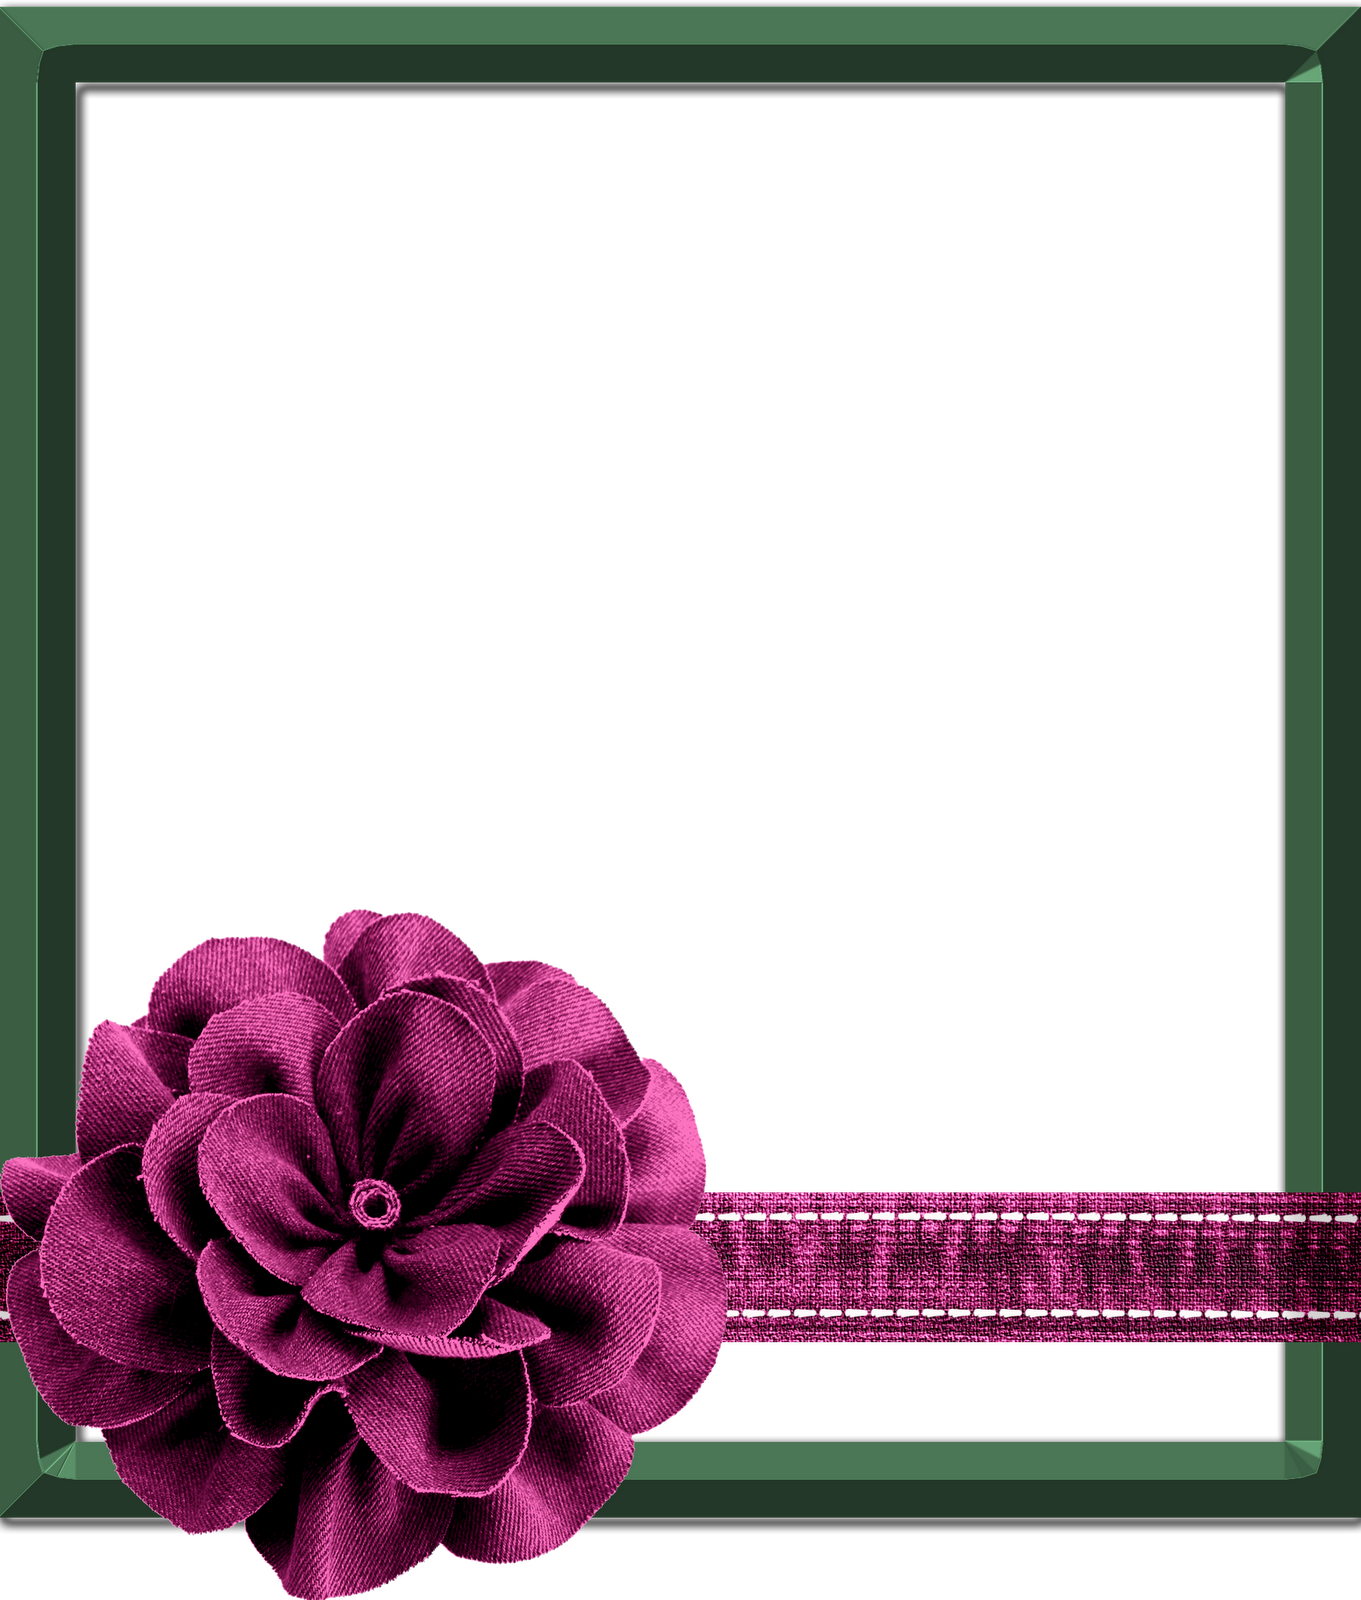 15 Flower Frames For Photoshop Images - Beautiful Flowers Frame Photoshop (1361x1600)